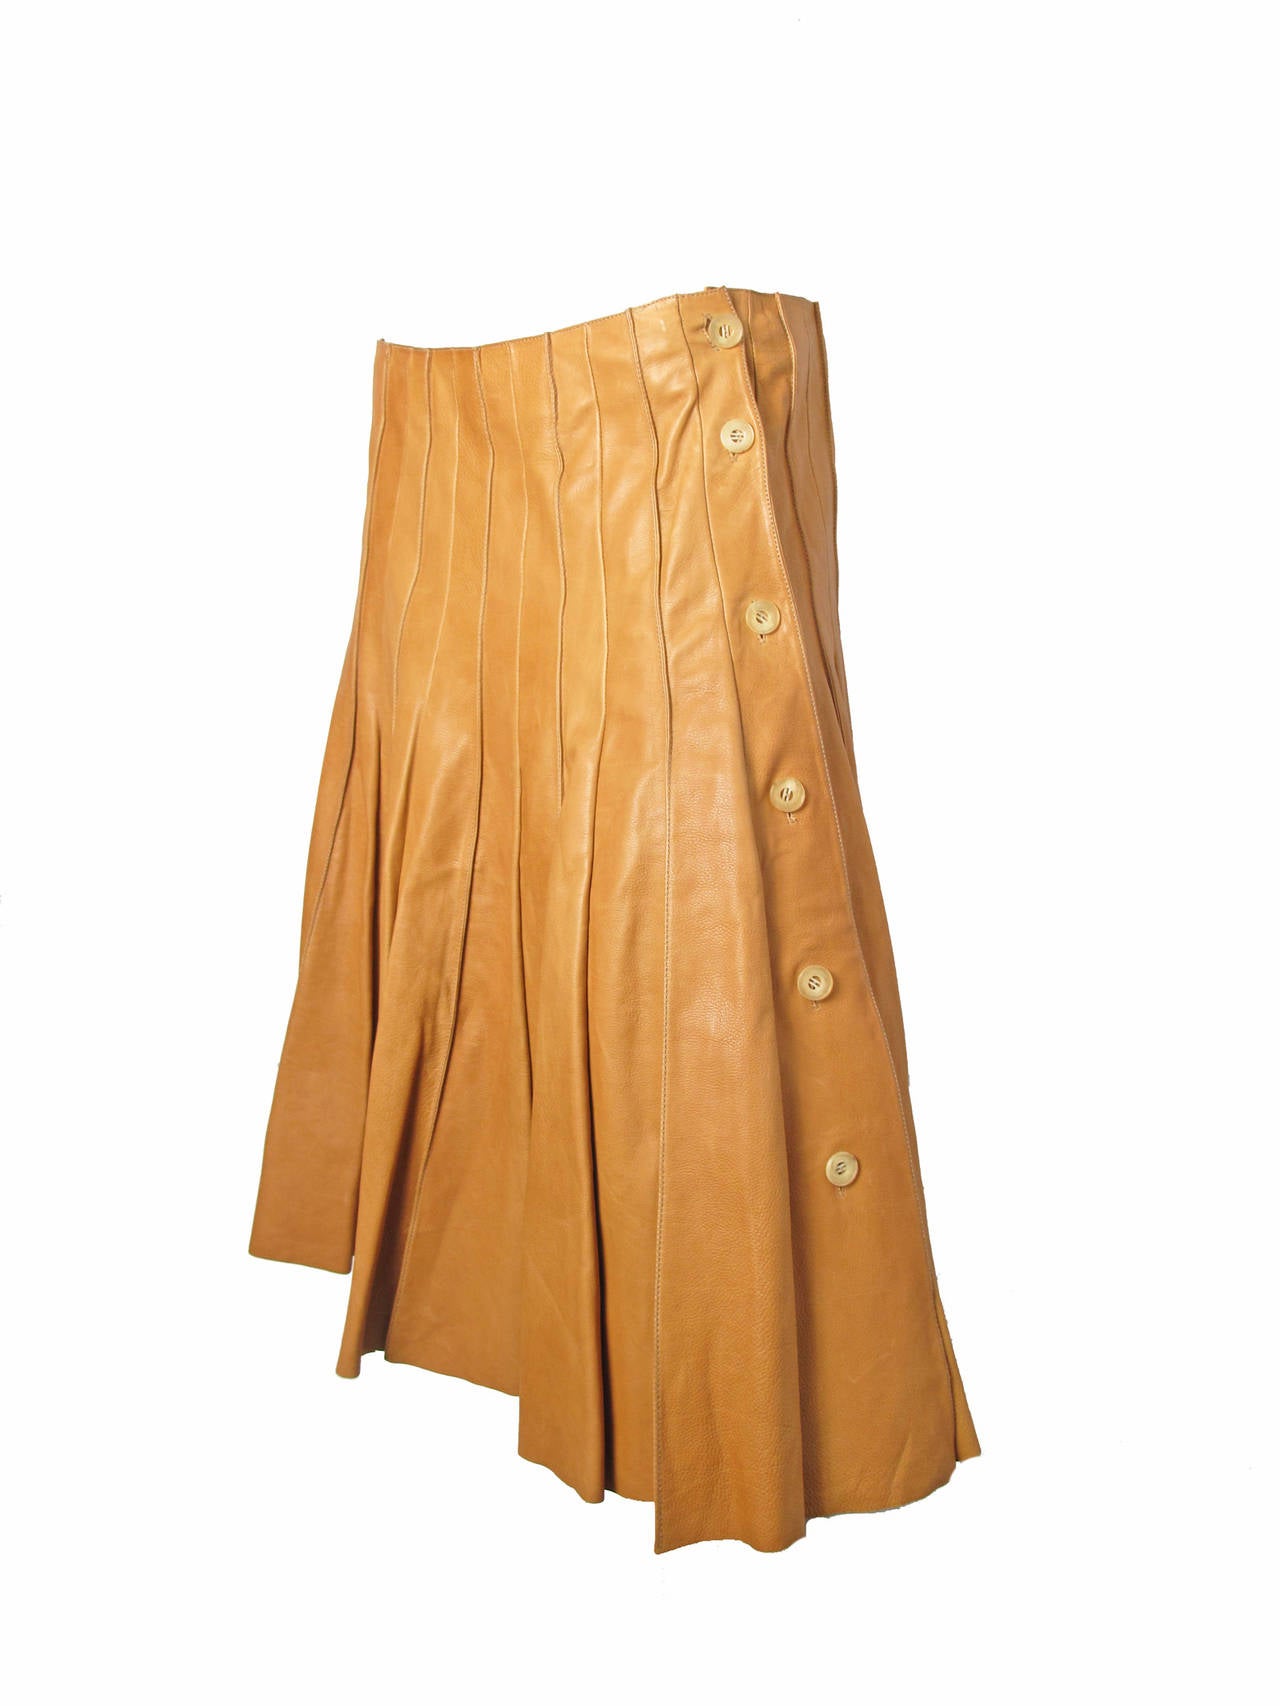 Rare Hermes soft tan leather pleated skirt runway with buttons down side and raw edge at hem.  Lined with silk.   Created 2005 by Jean Paul Gaultier for Hermes.   

31